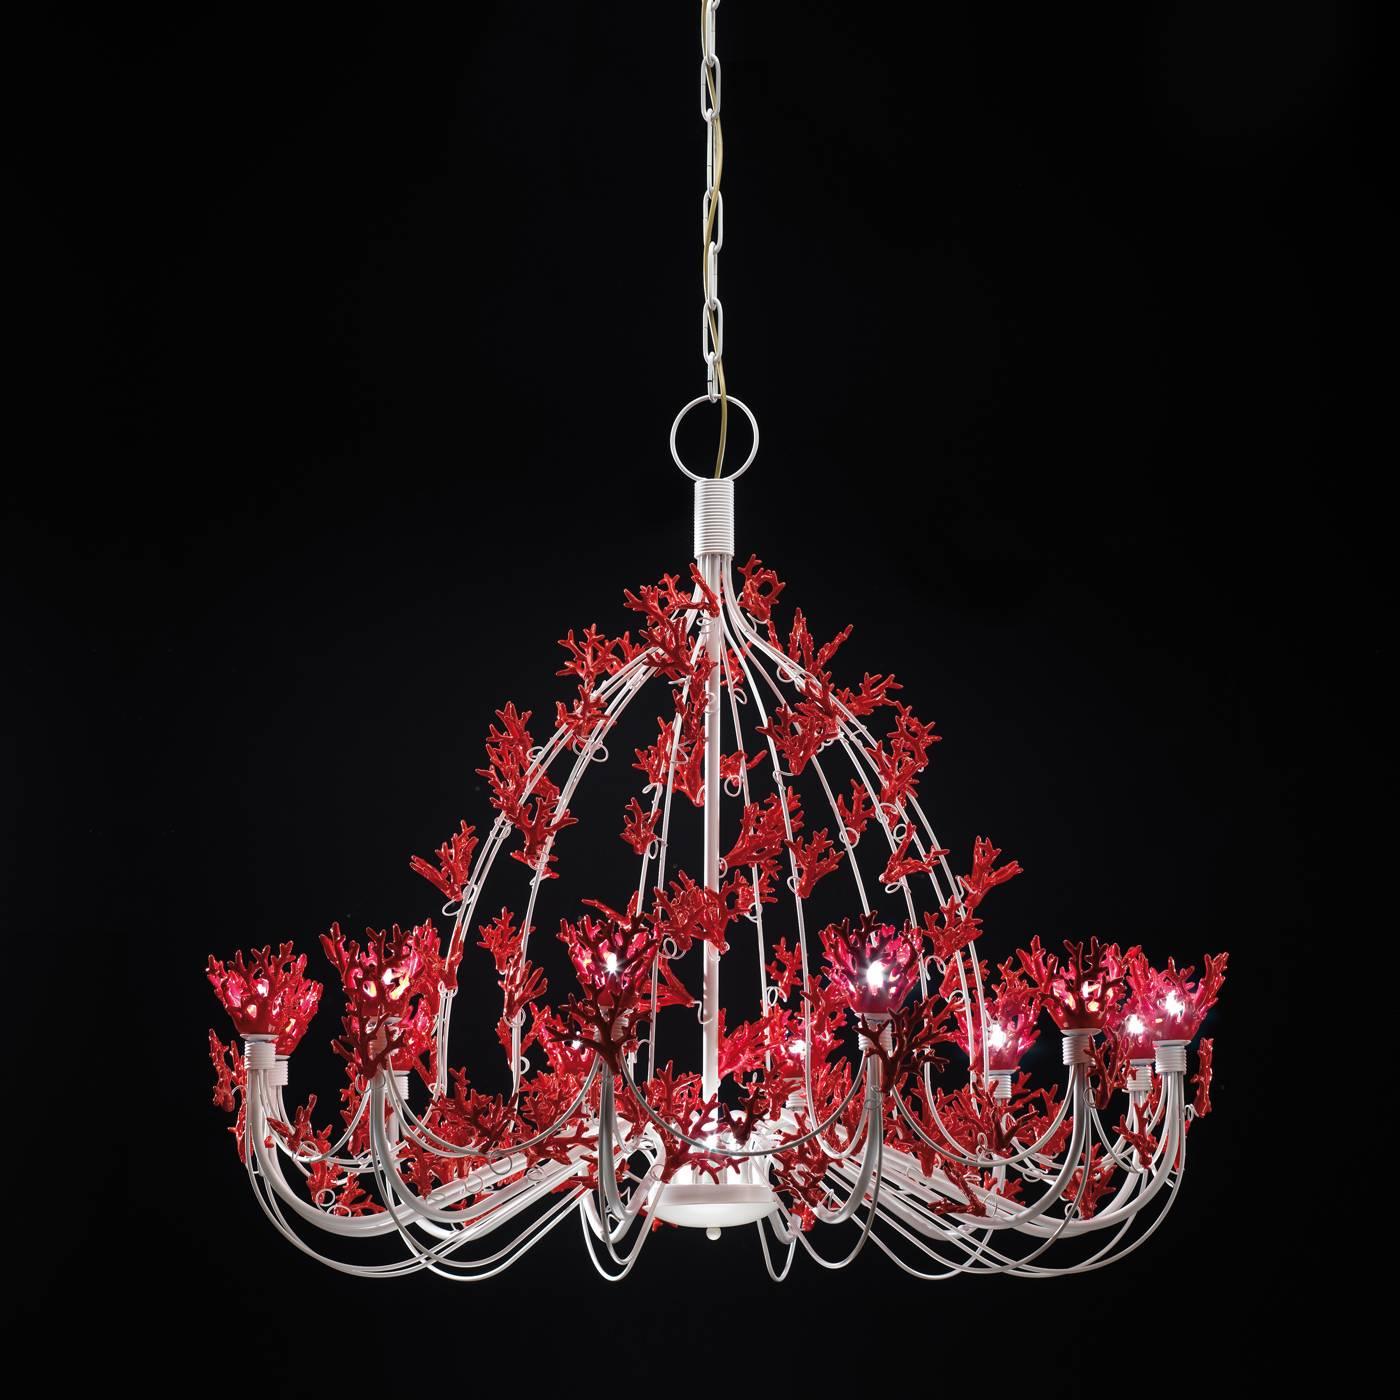 This elegant chandelier is a true objet d'art. This piece features 12 skyward curving arms stemming from a central structure in polished opaque white metal. The entire framework and arms are adorned with completely handcrafted red ceramic coral